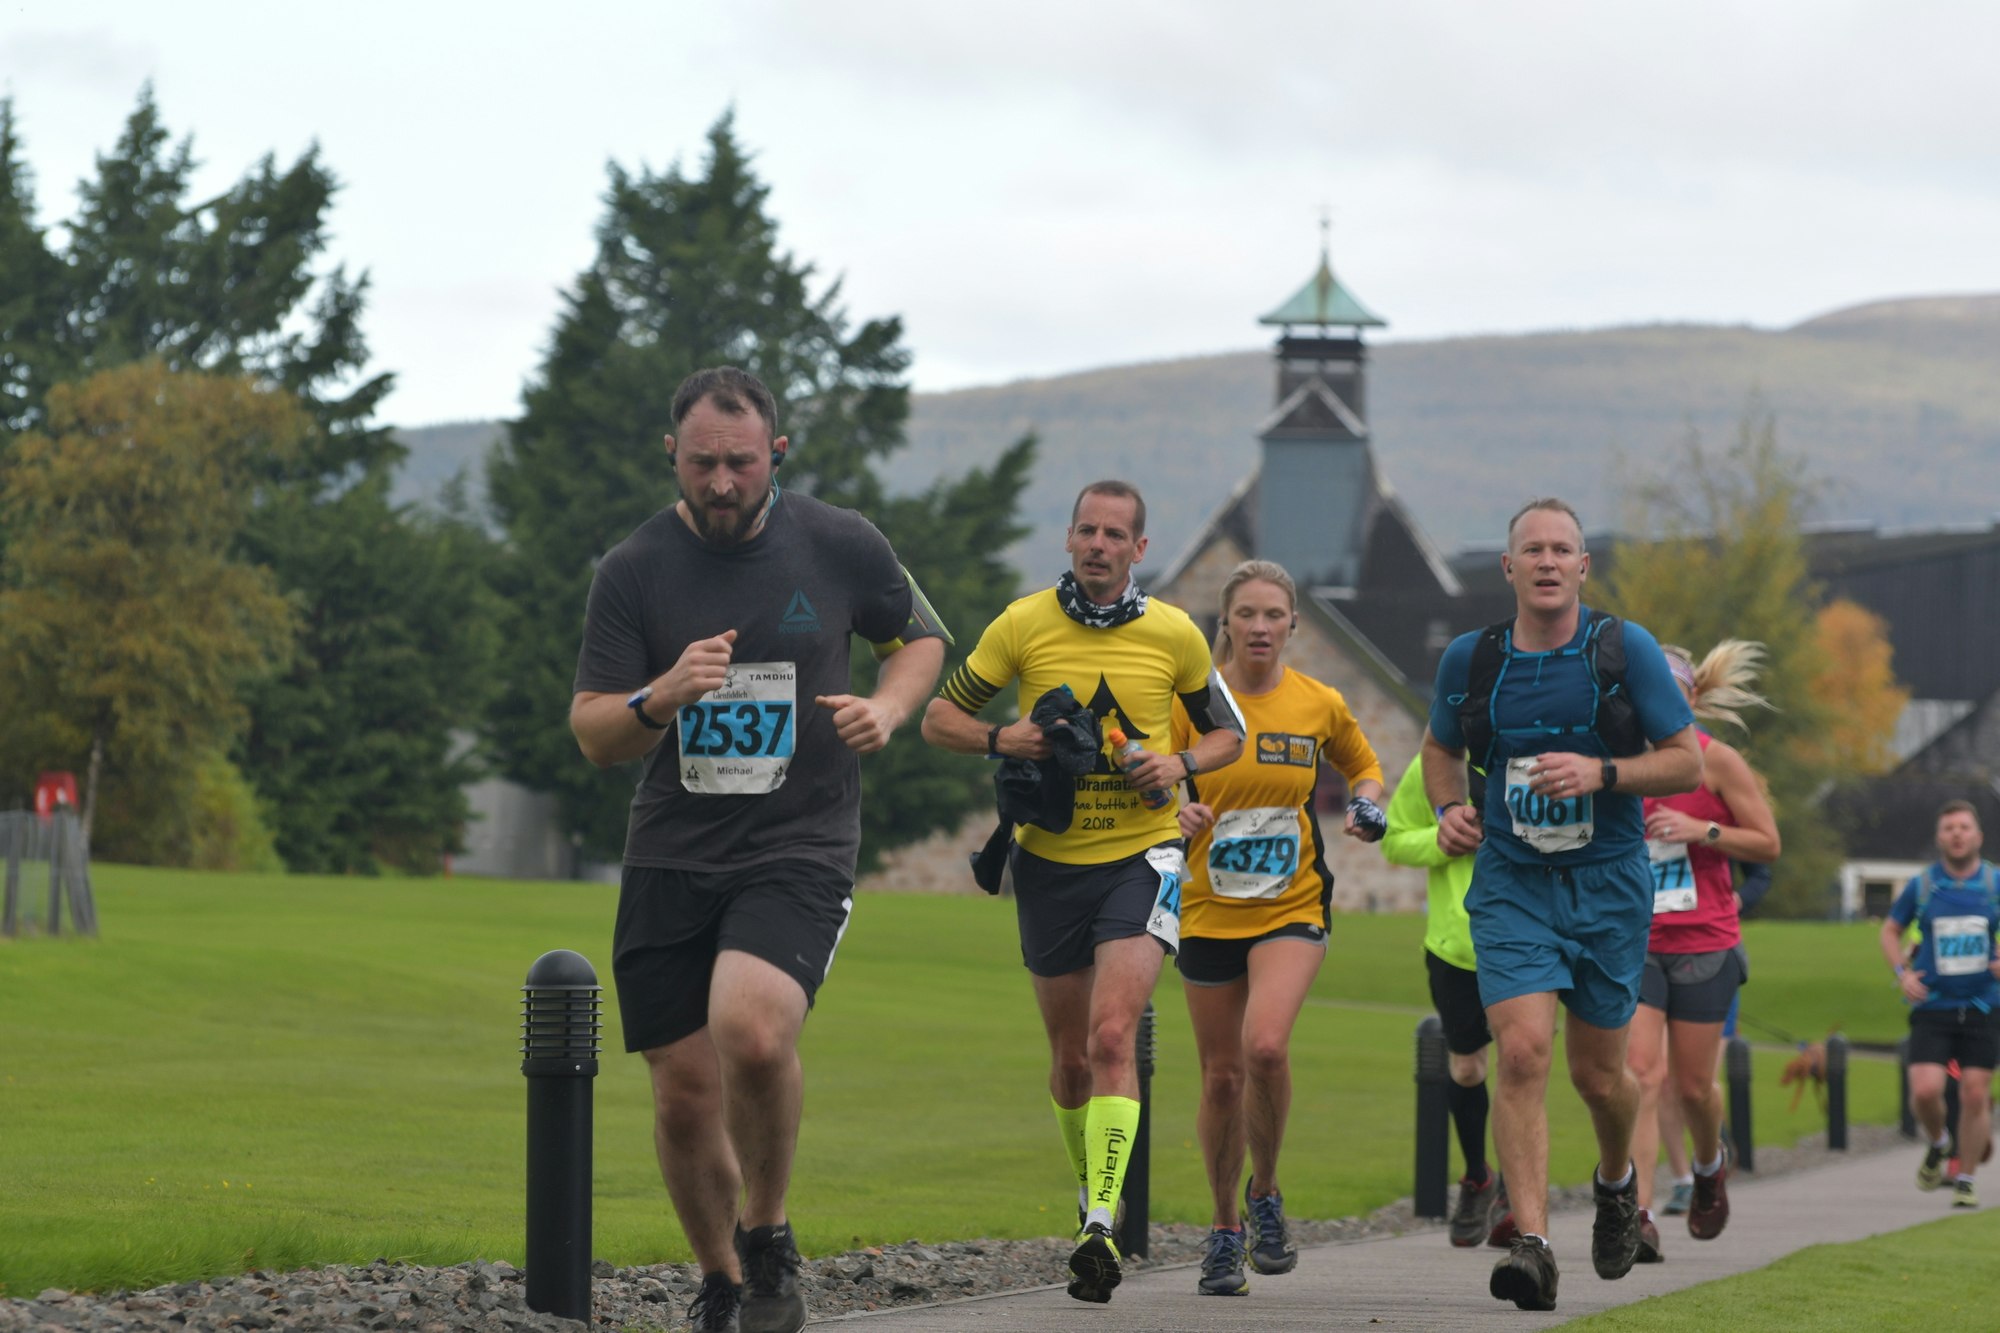 A group of racers are running along a path through landscaped grounds on an overcast day. Behind them, the turret of a distillery is visible.